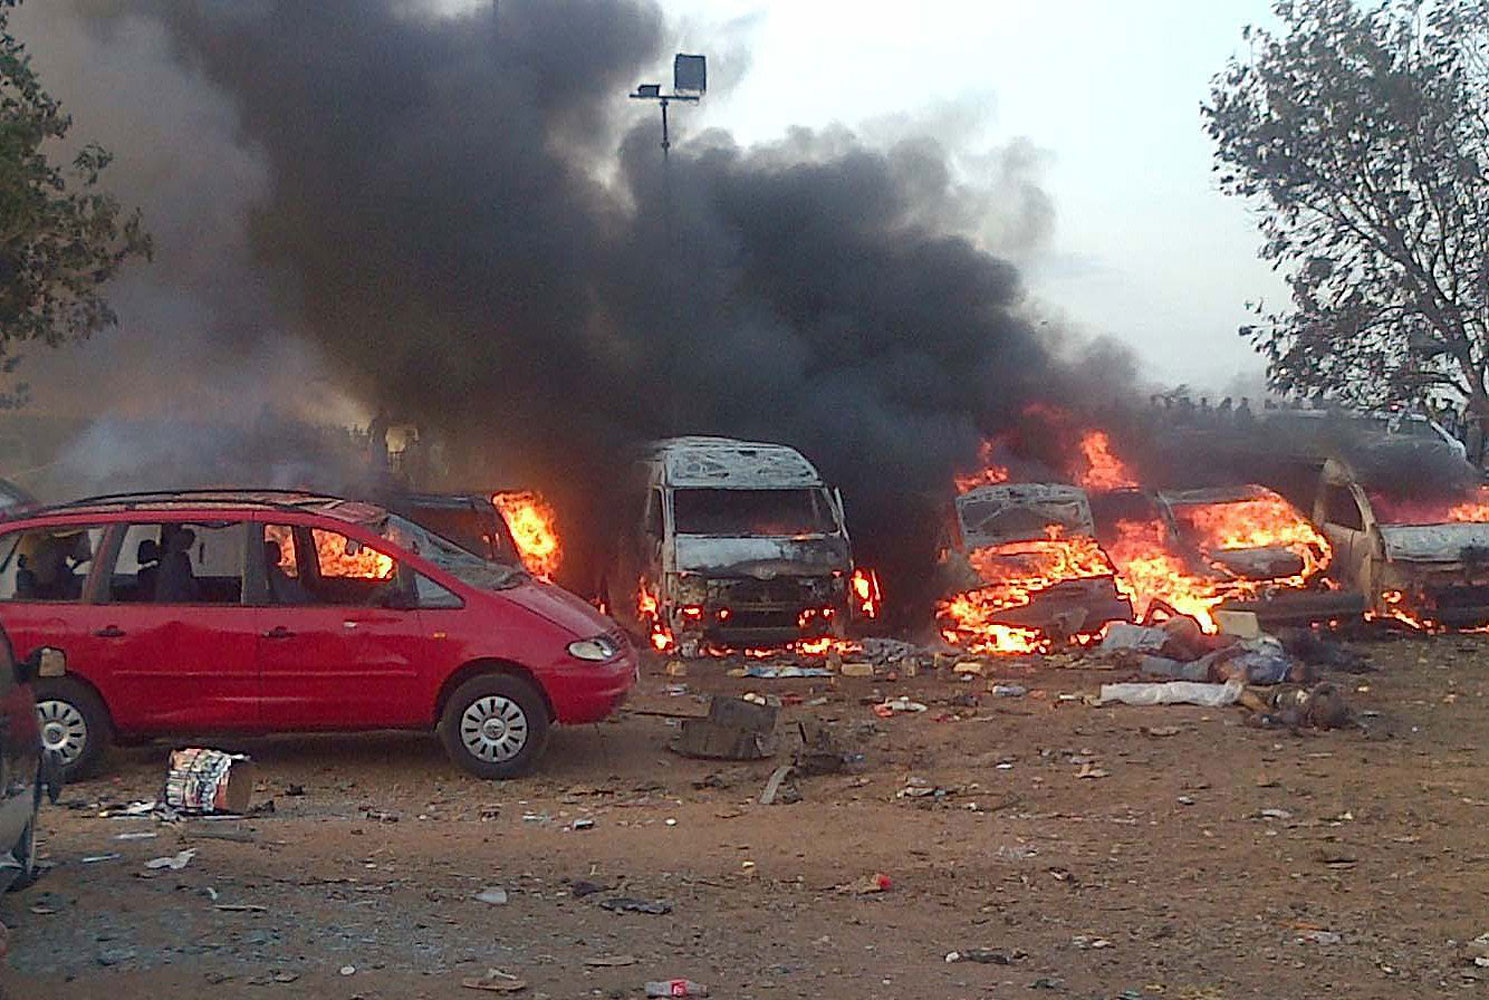 Vehicles burn after an attack in Abuja on April 14, 2014.